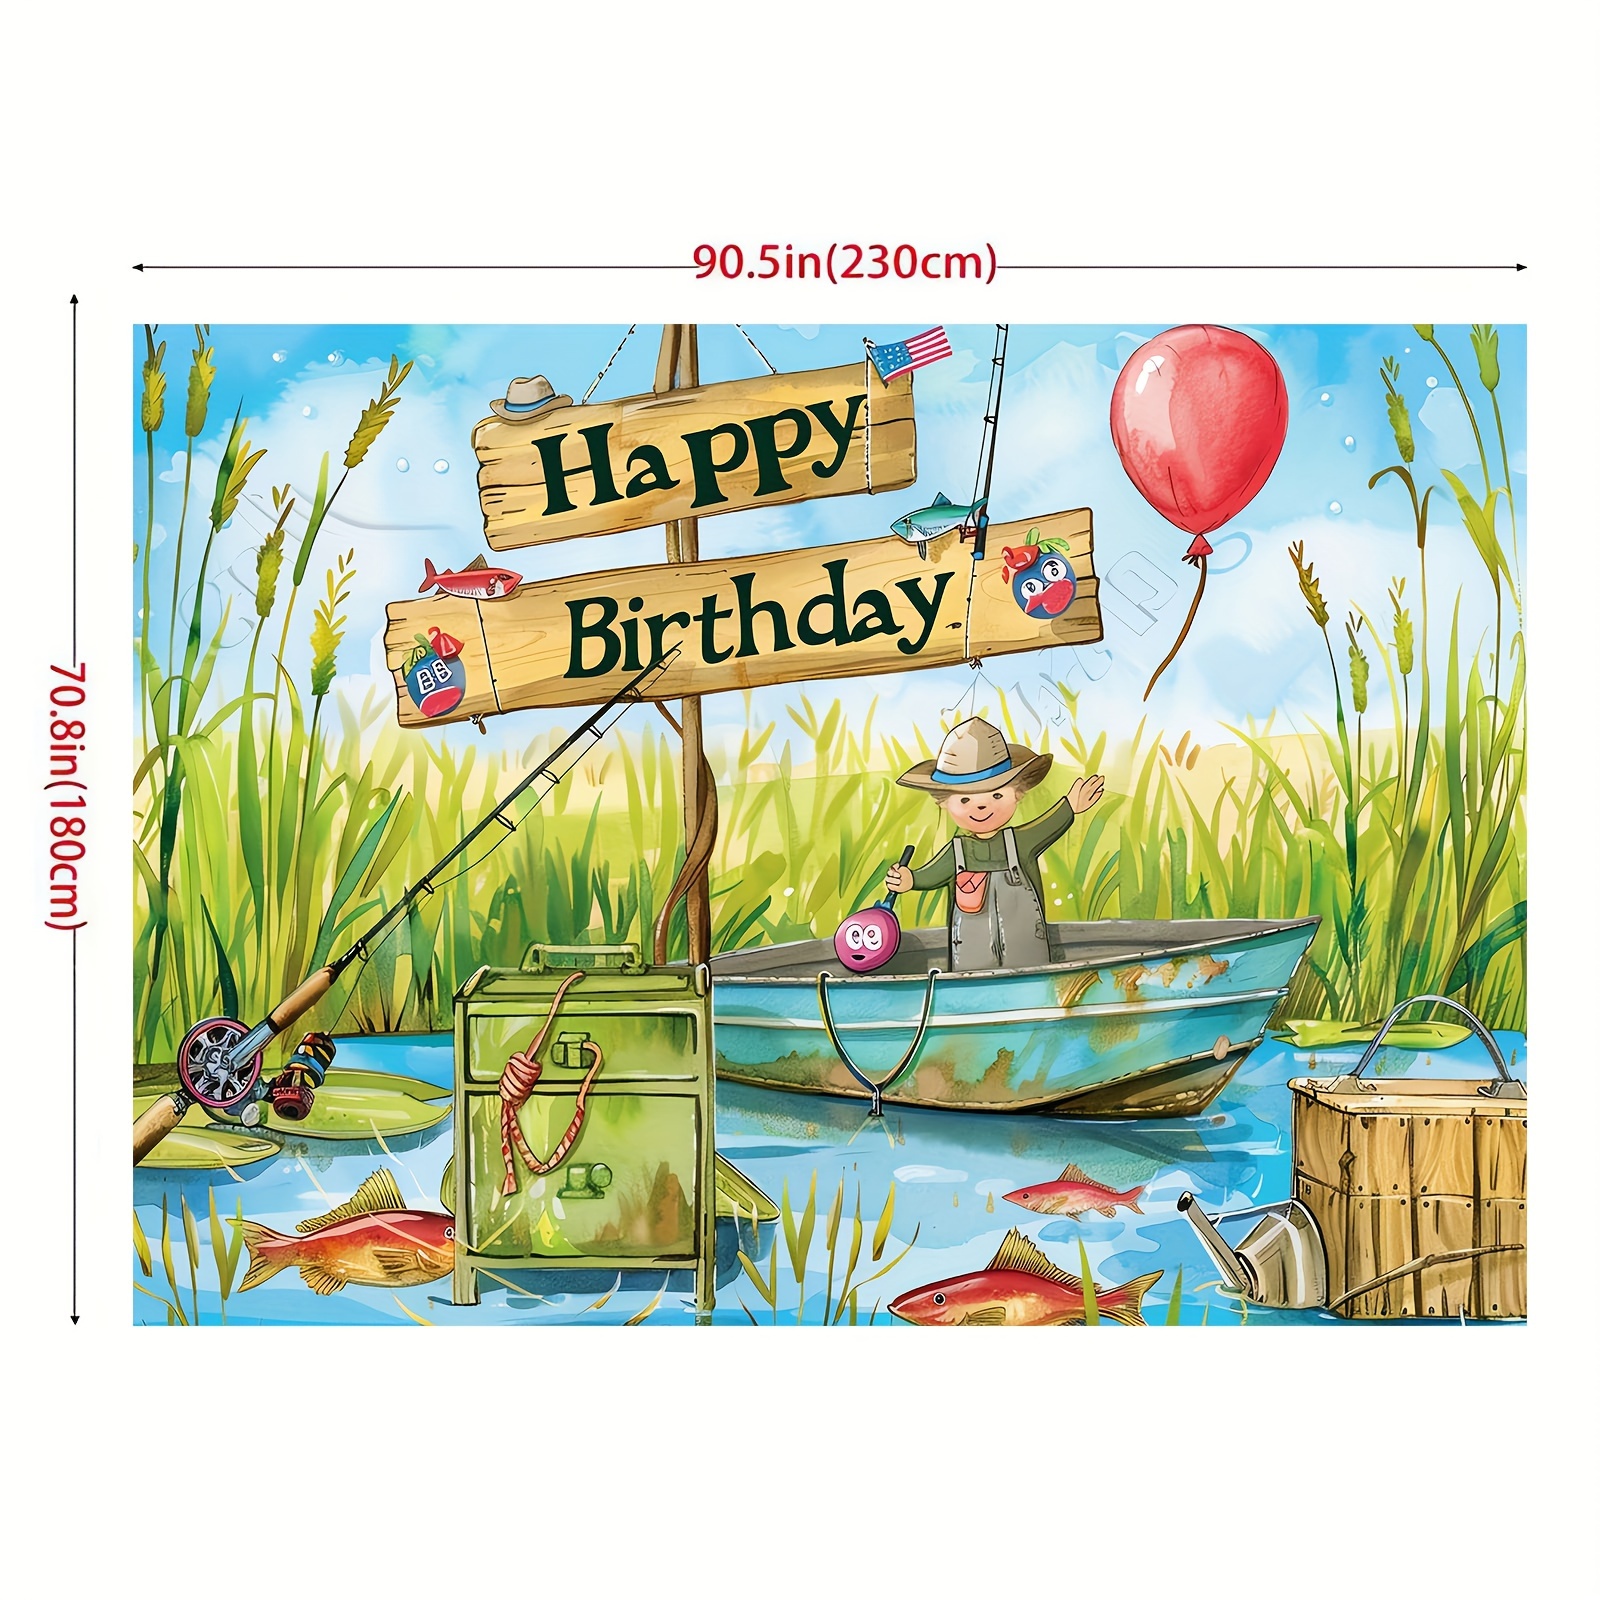 1pc happy birthday polyester photography backdrop multipurpose fishing pool theme banner decorations for spring and summer occasions atmosphere decoration props without electricity use